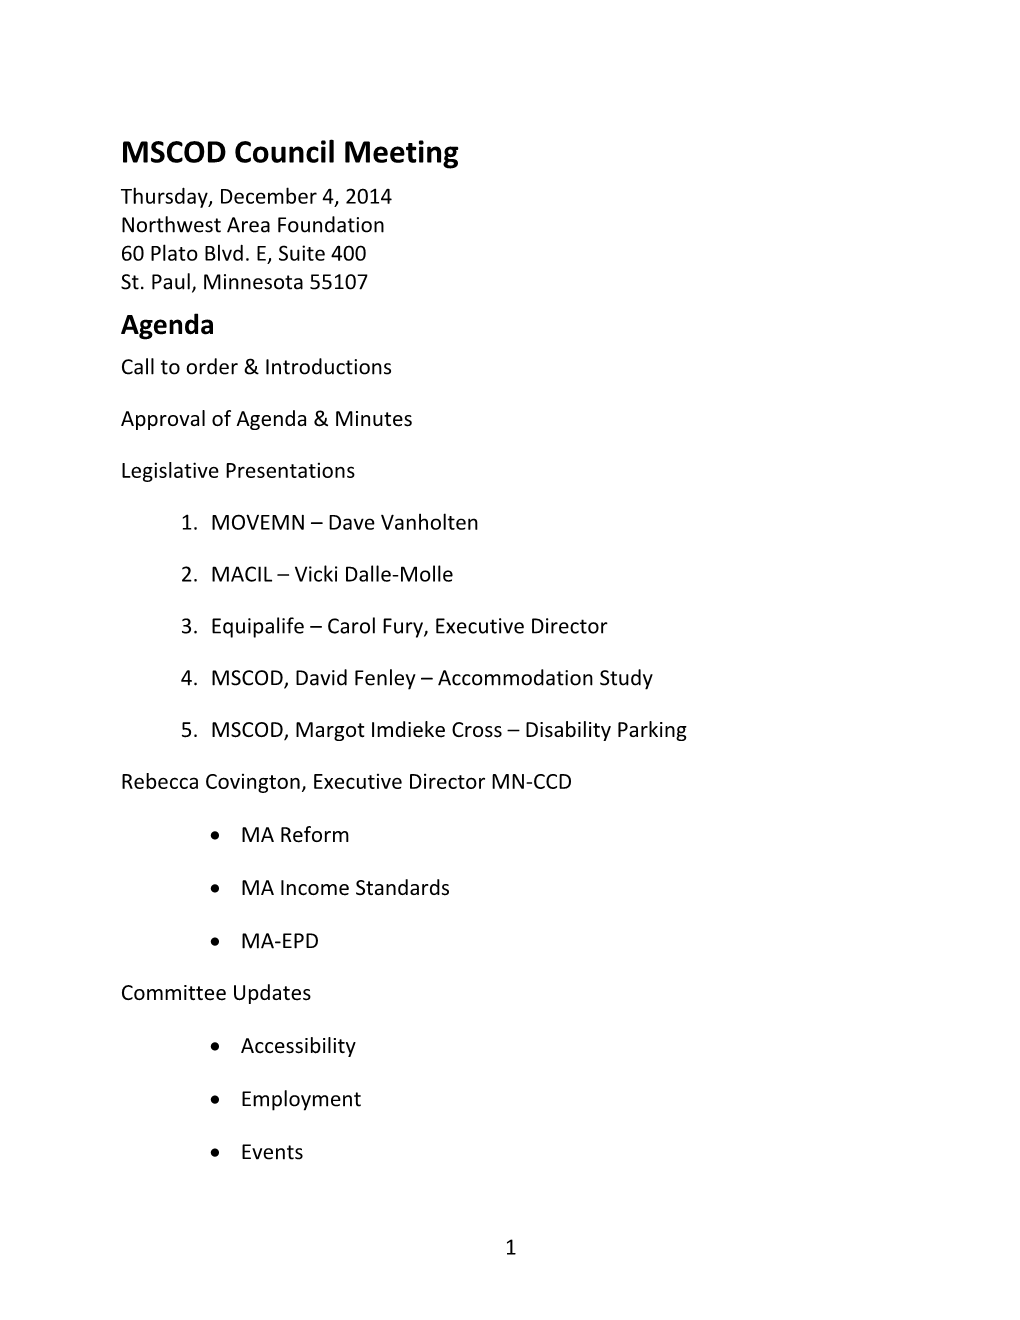 MSCOD Full Council Meeting Minutes, 12/04/2014